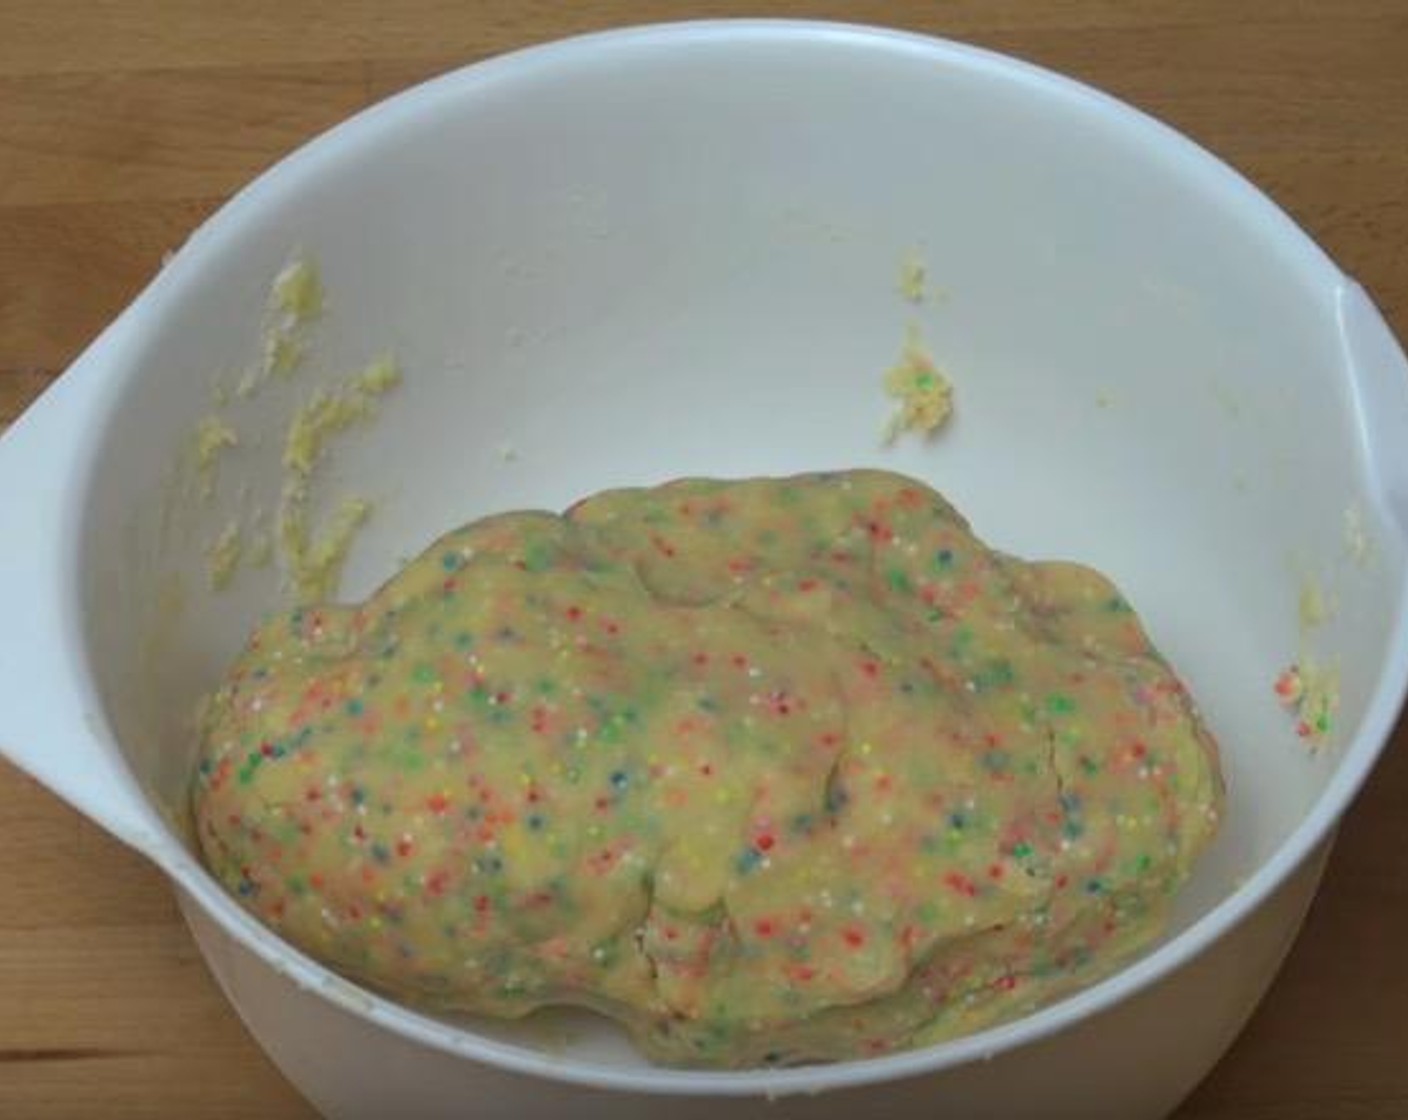 step 3 Sift in All-Purpose Flour (2 cups) and add Sprinkles (1/2 cup). With a spoon, gently mix together until everything is combined.